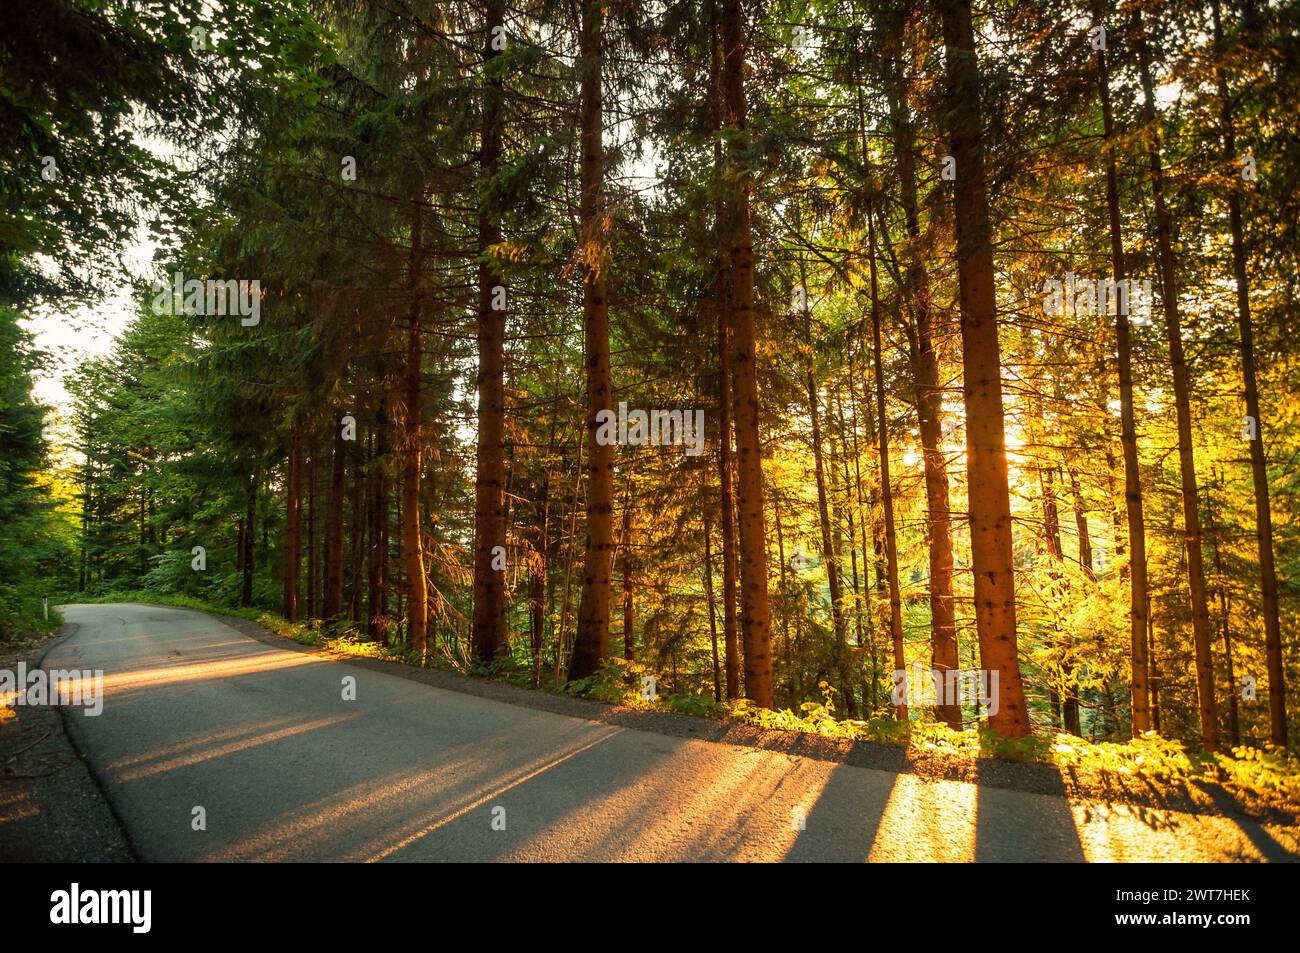 Driving through alpine forest at sunset. Pine trees cast long shadows on the ground. Backlit illuminated forest in mountain countryside. Stock Photo